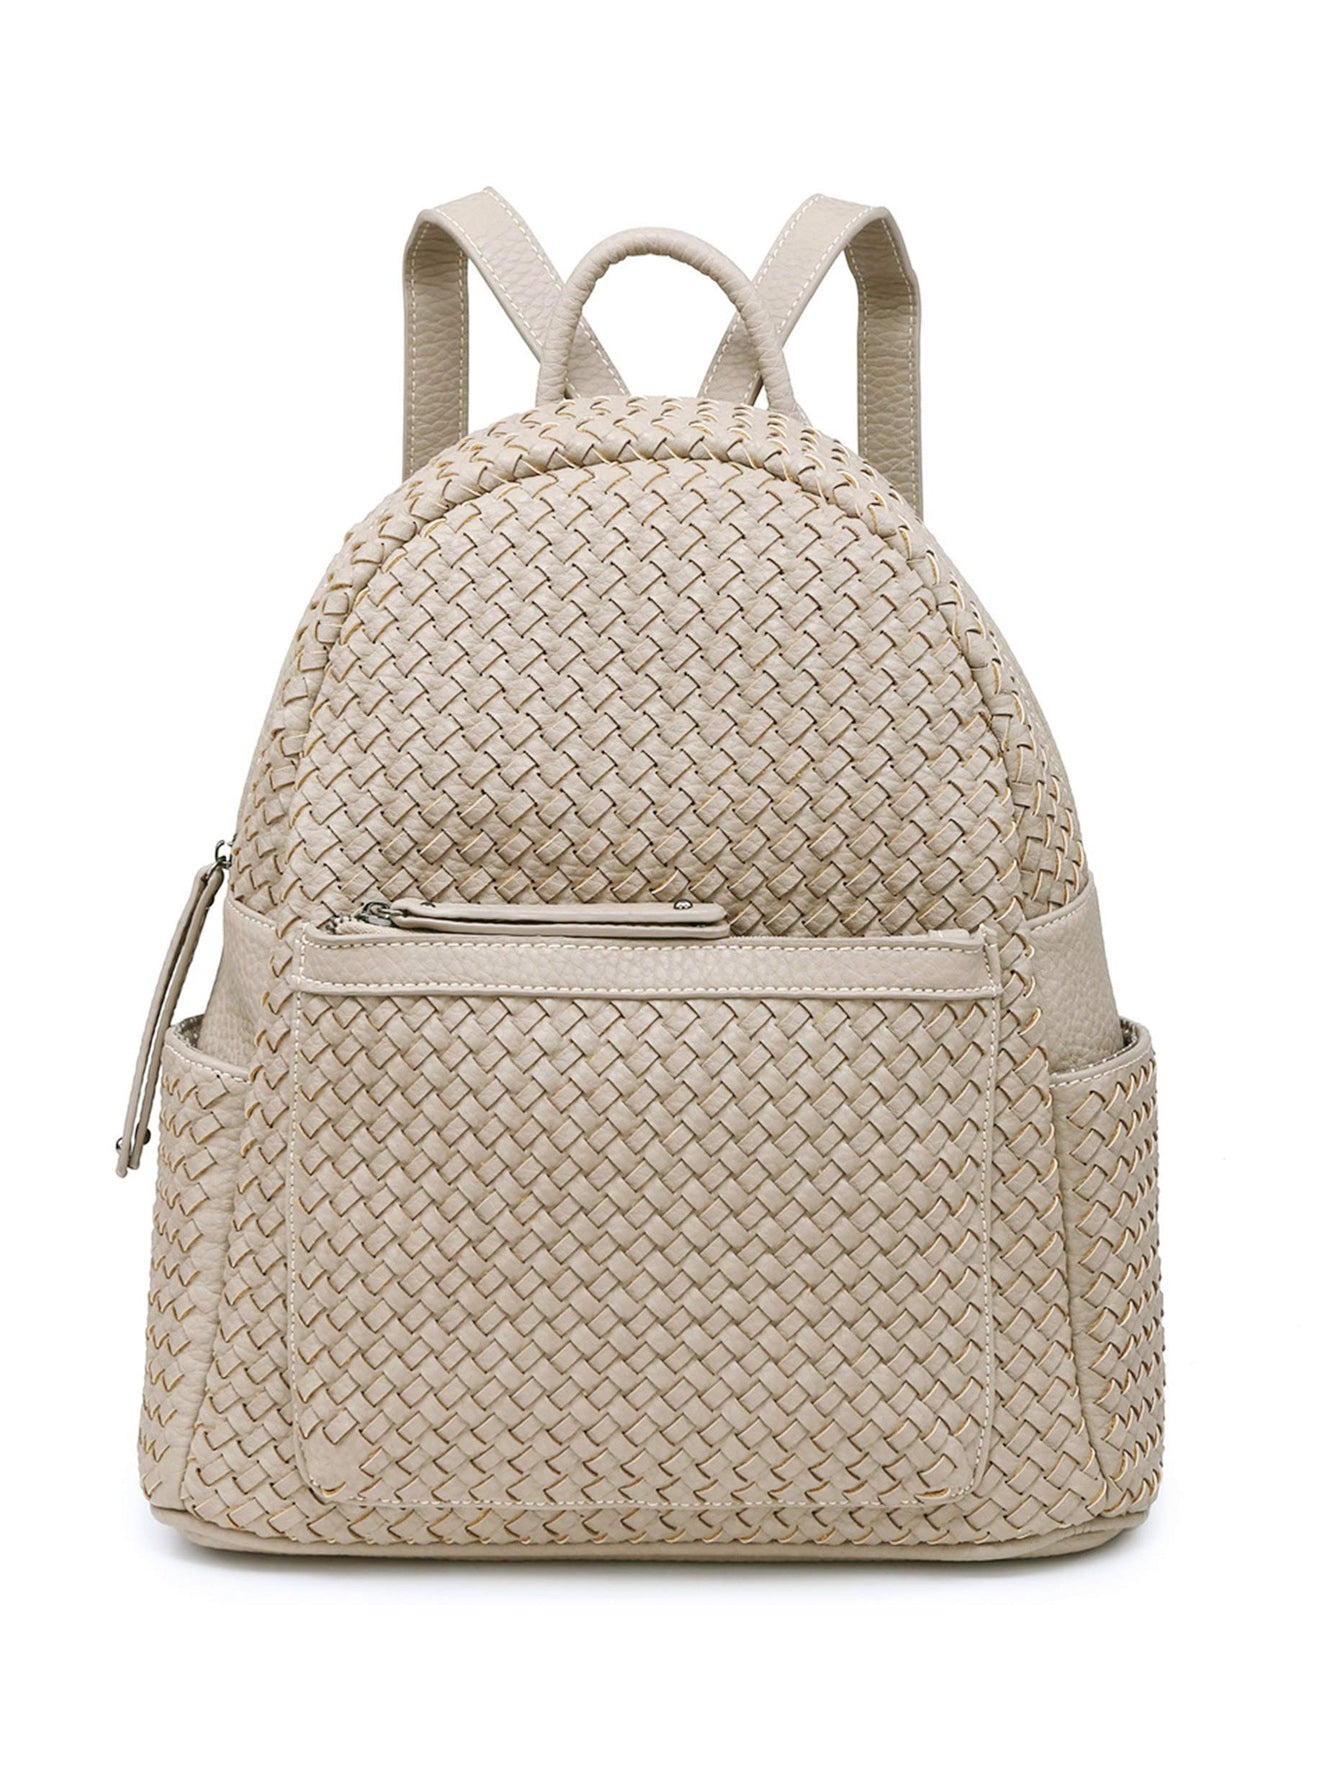 Woven Backpack Purse for Women: A Sustainable and Stylish Way to Carry Your Essentials - EcoArtisans